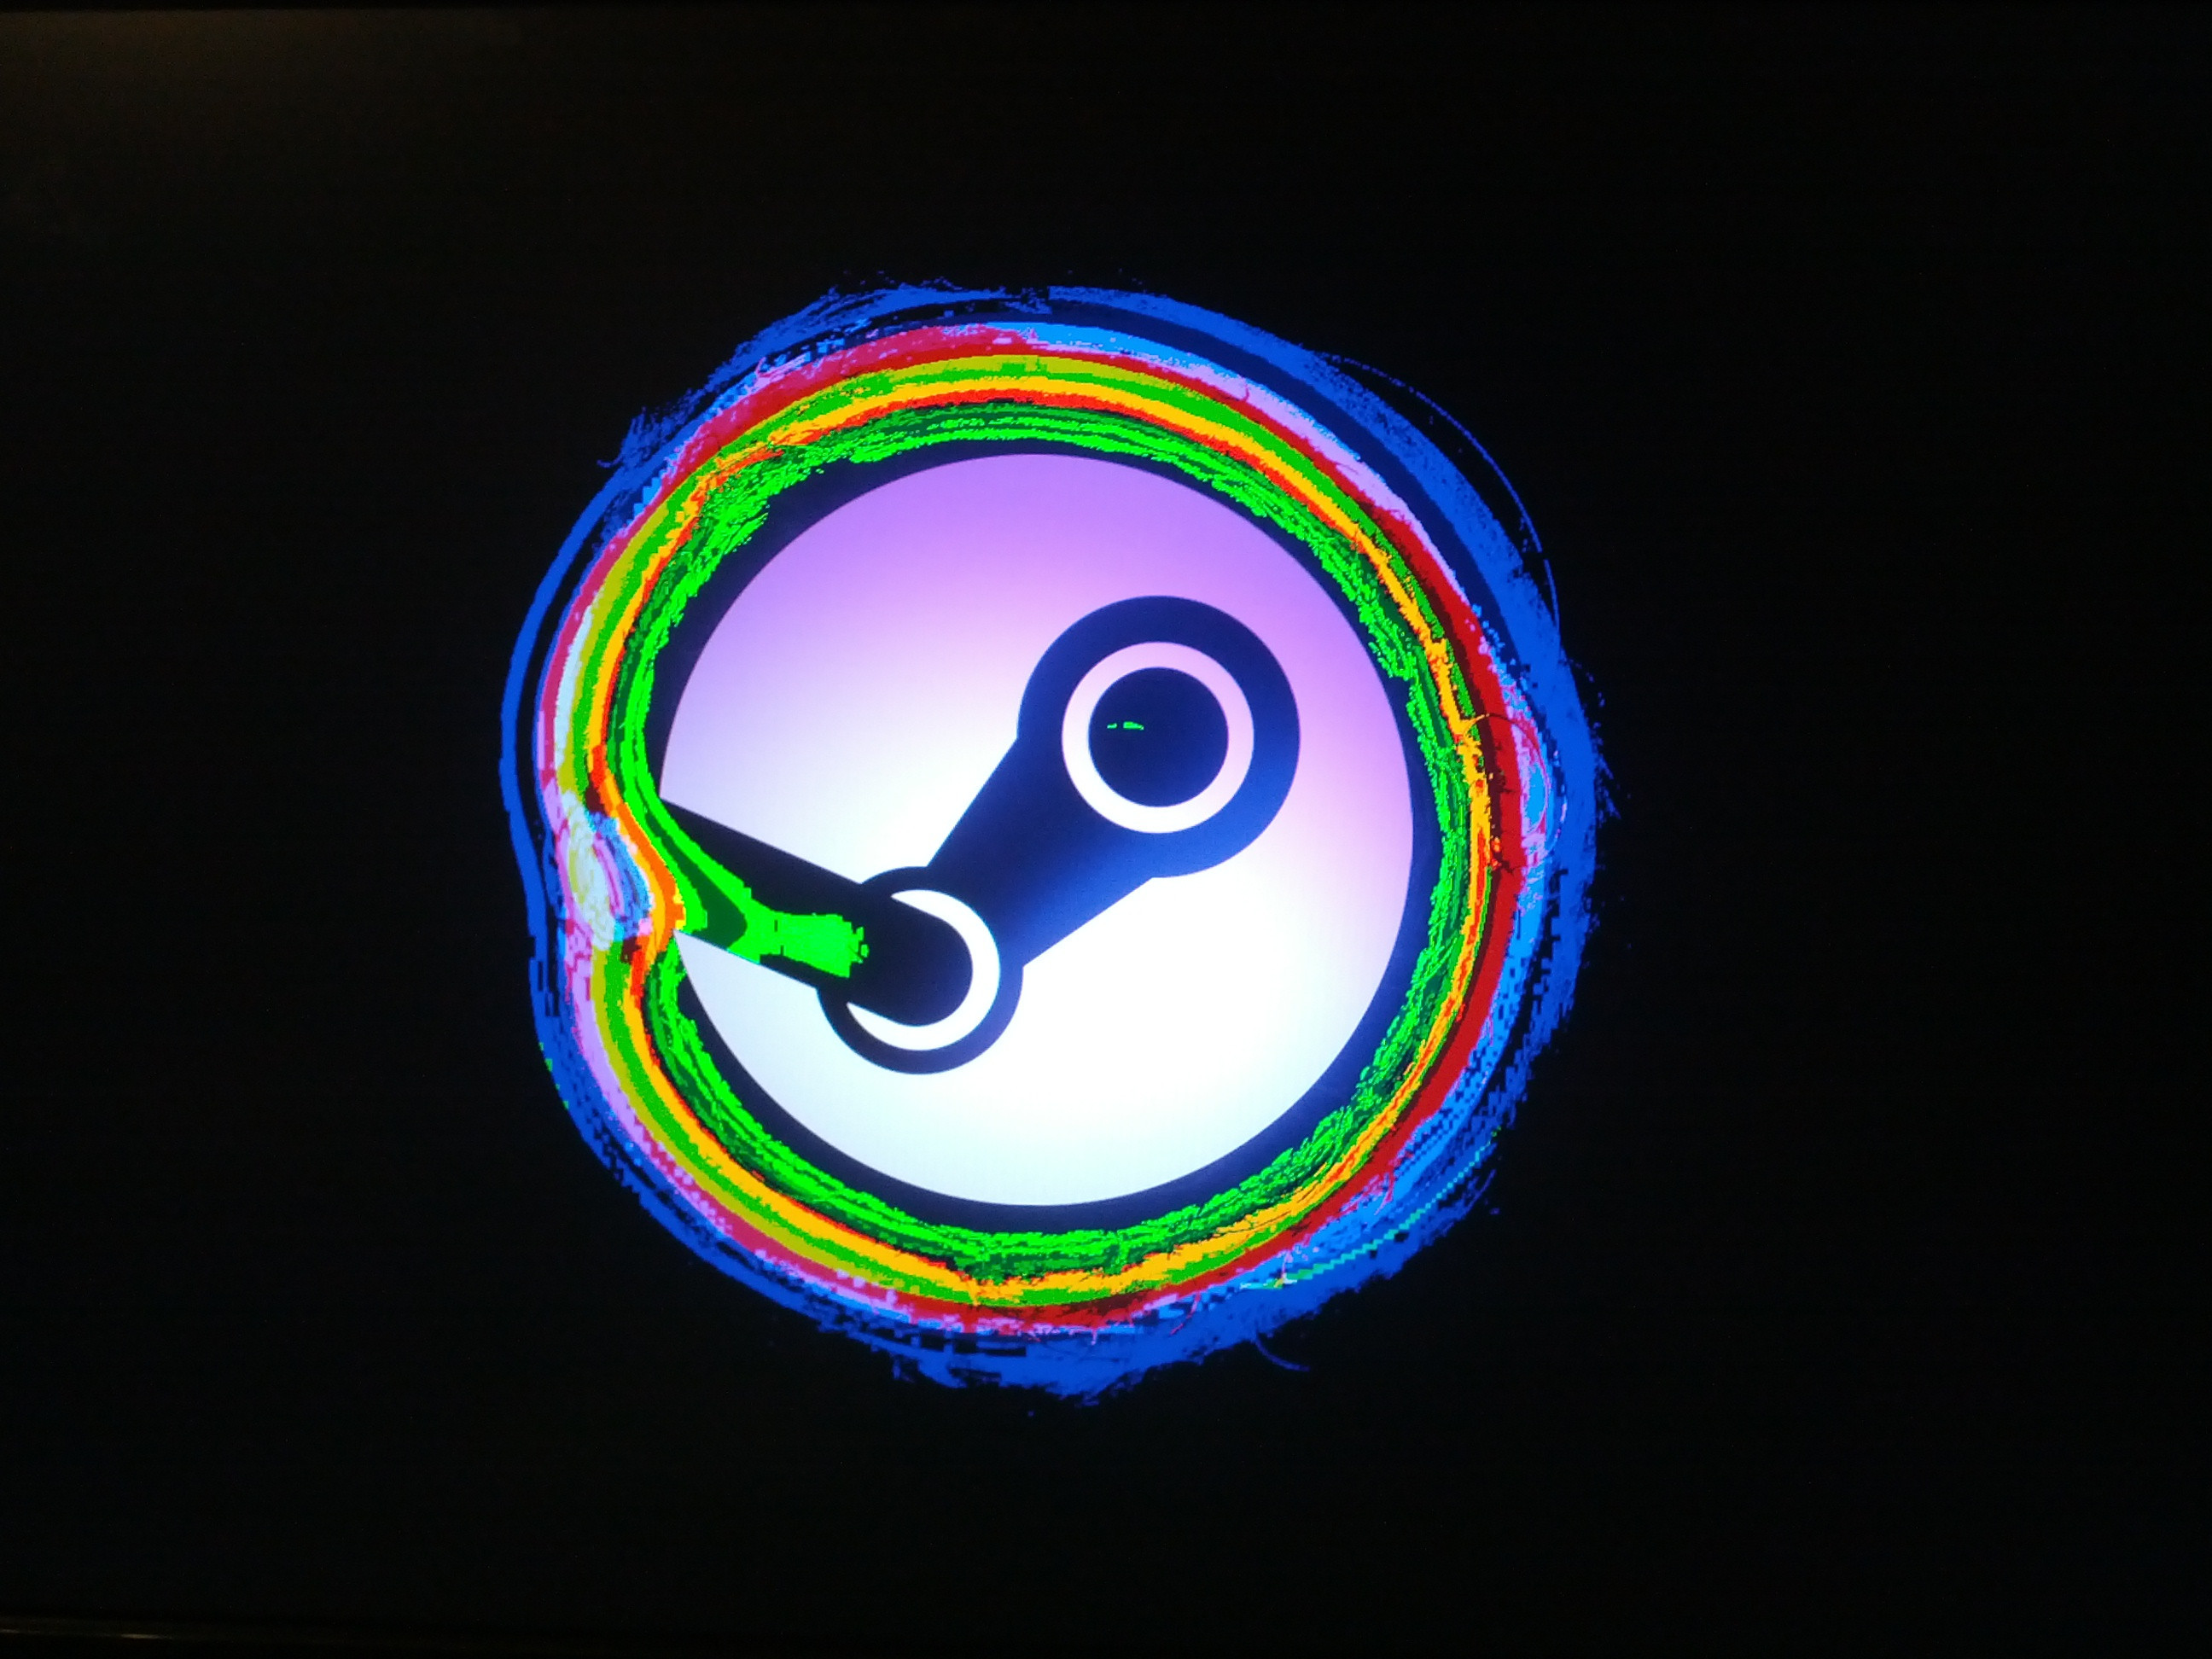 2592x1944 While messing with my current Steambox this boot image showed up. I now use  it as my wallpaper.